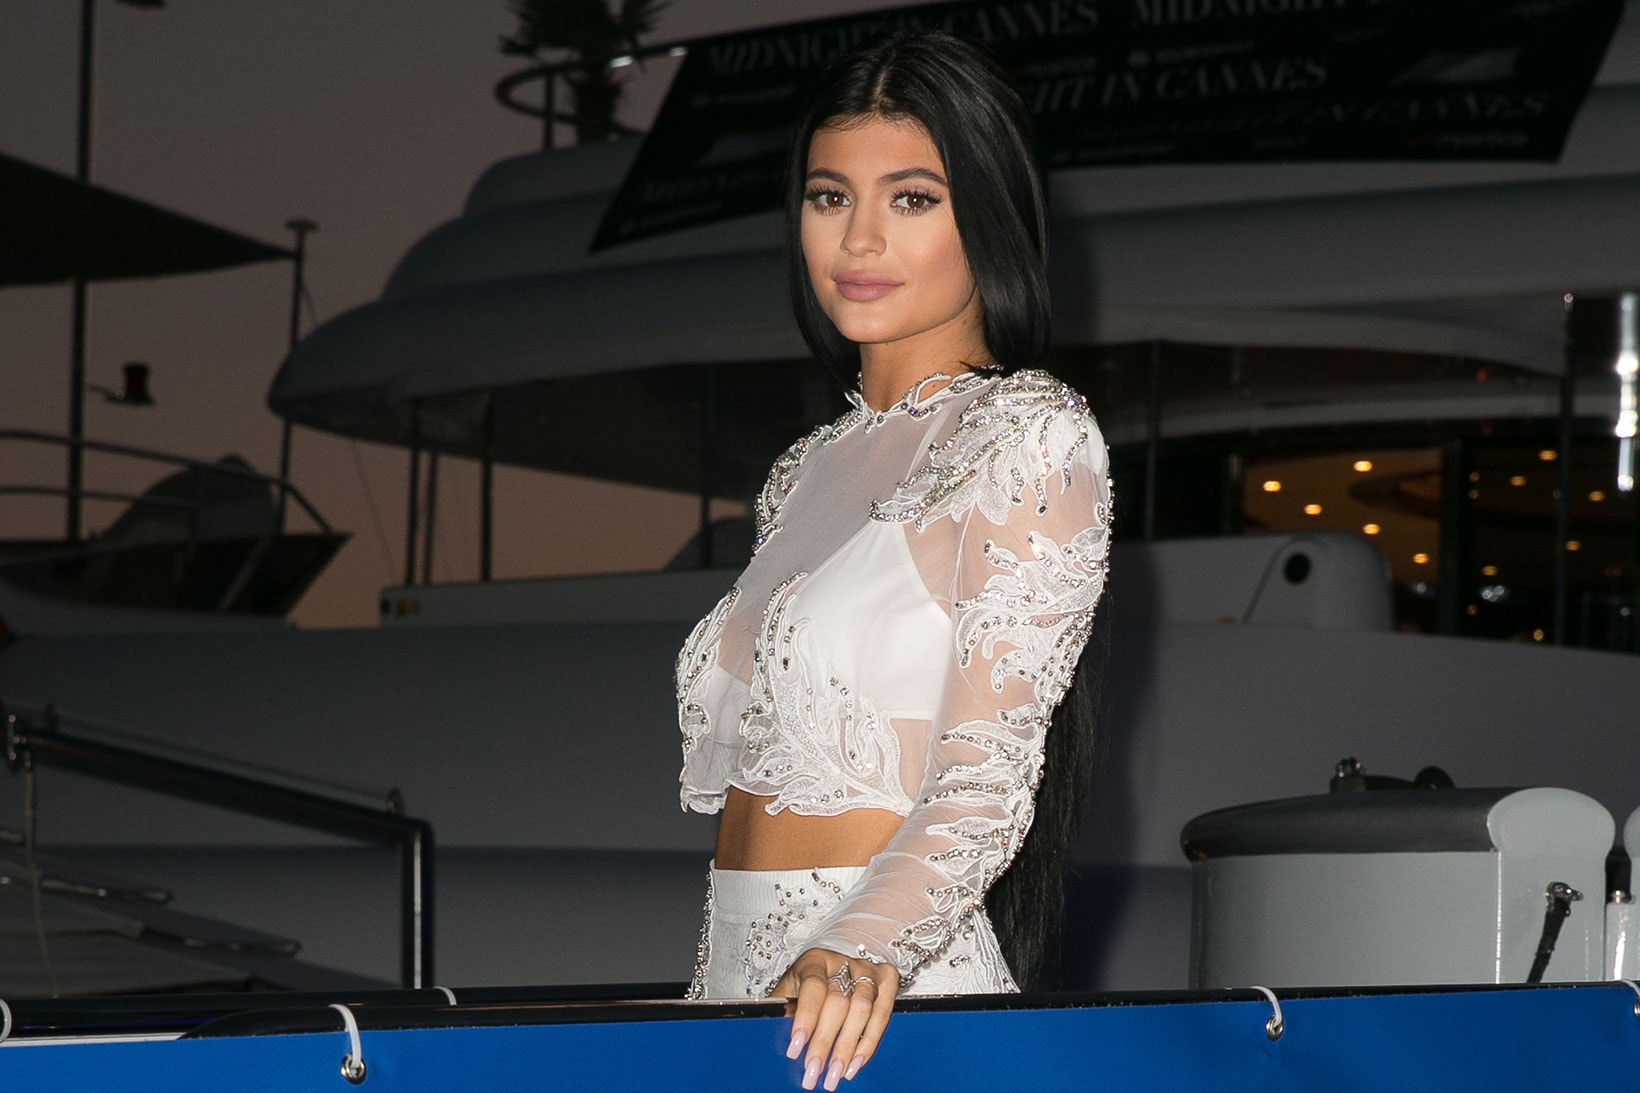 kylie jenner birthday super-yacht tranquility luxurious party kardashians bday